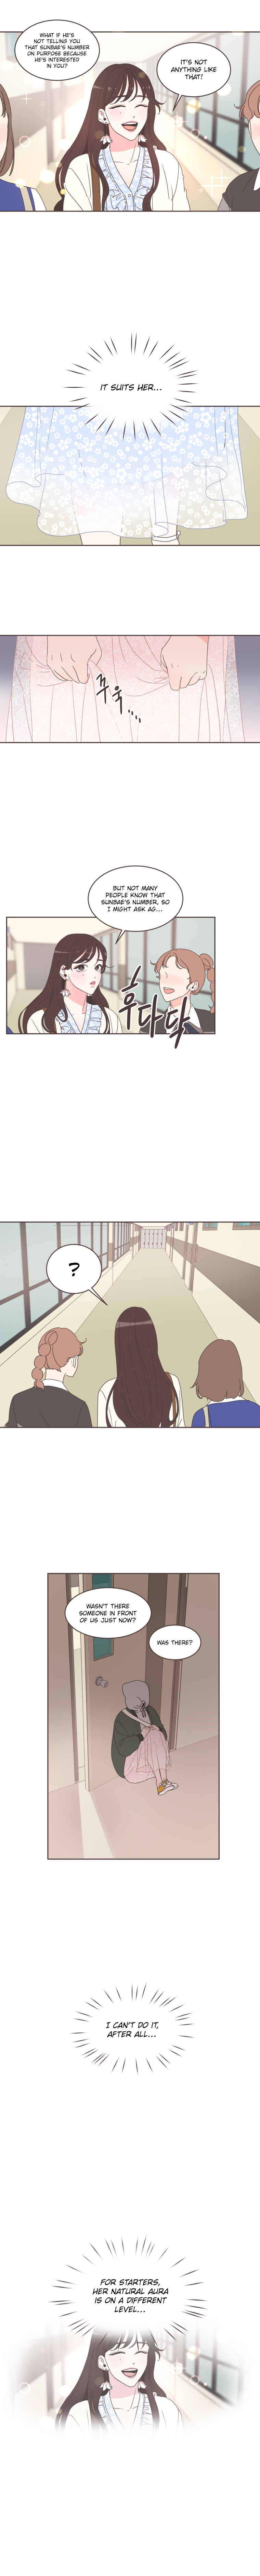 She's My Type - Chapter 16 Page 10